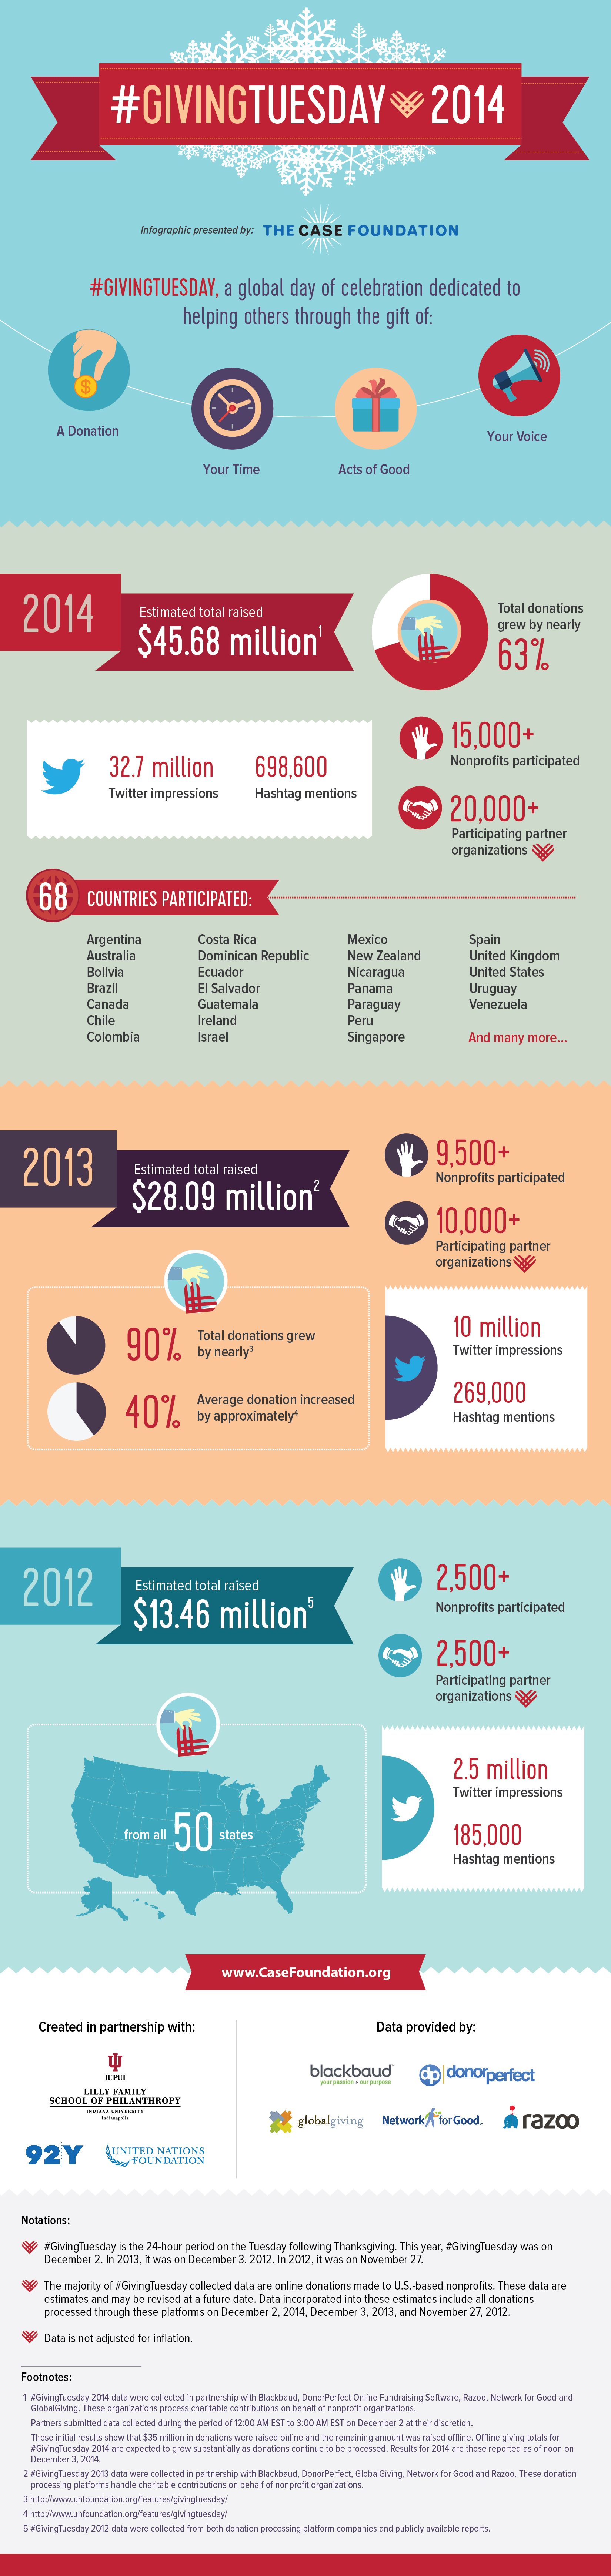 Giving Tuesday Infographic 2014